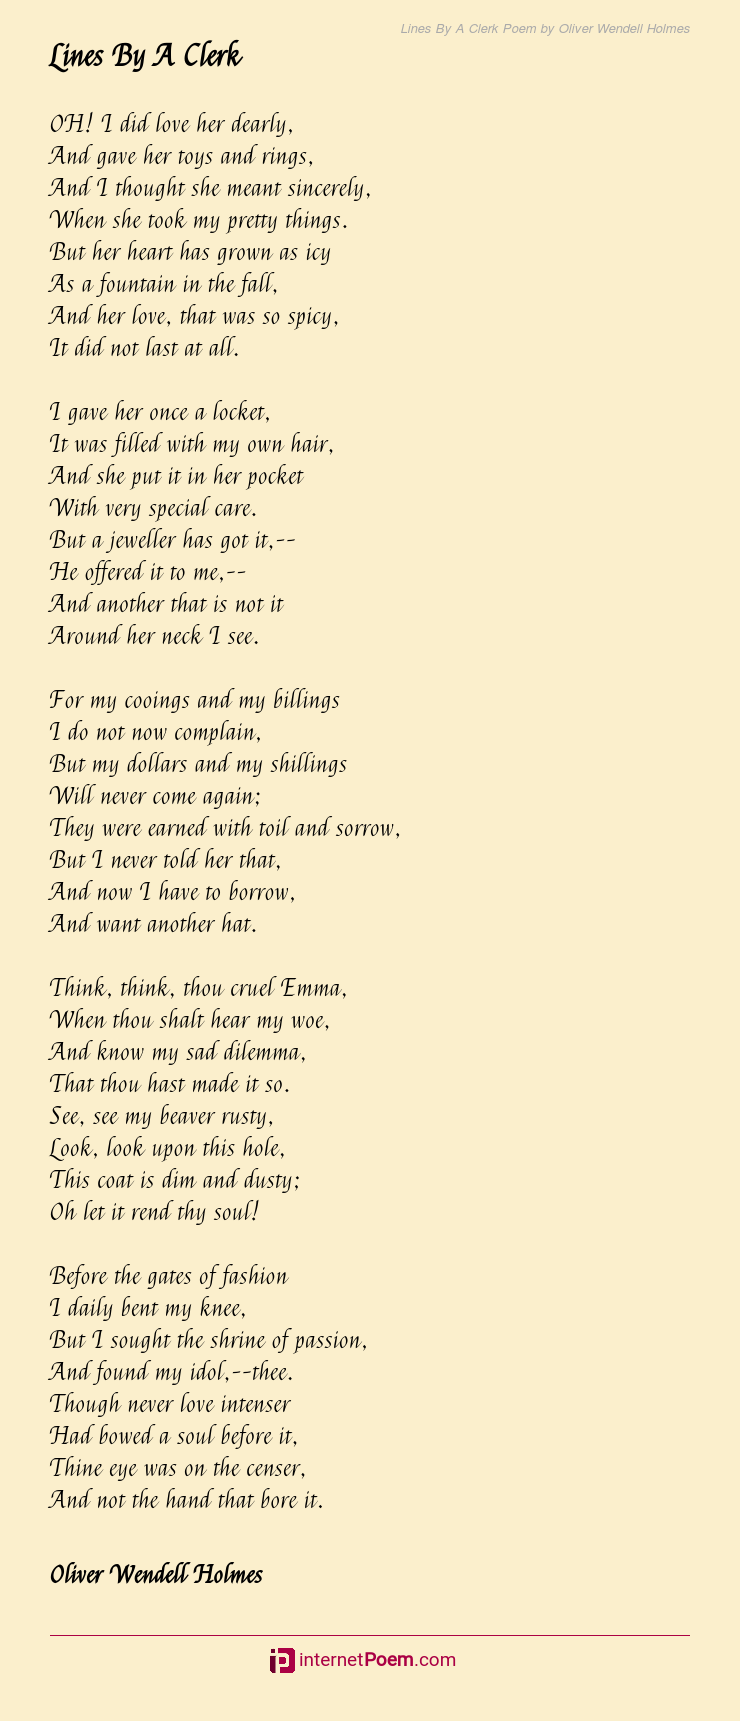 Lines By A Clerk Poem by Oliver Wendell Holmes